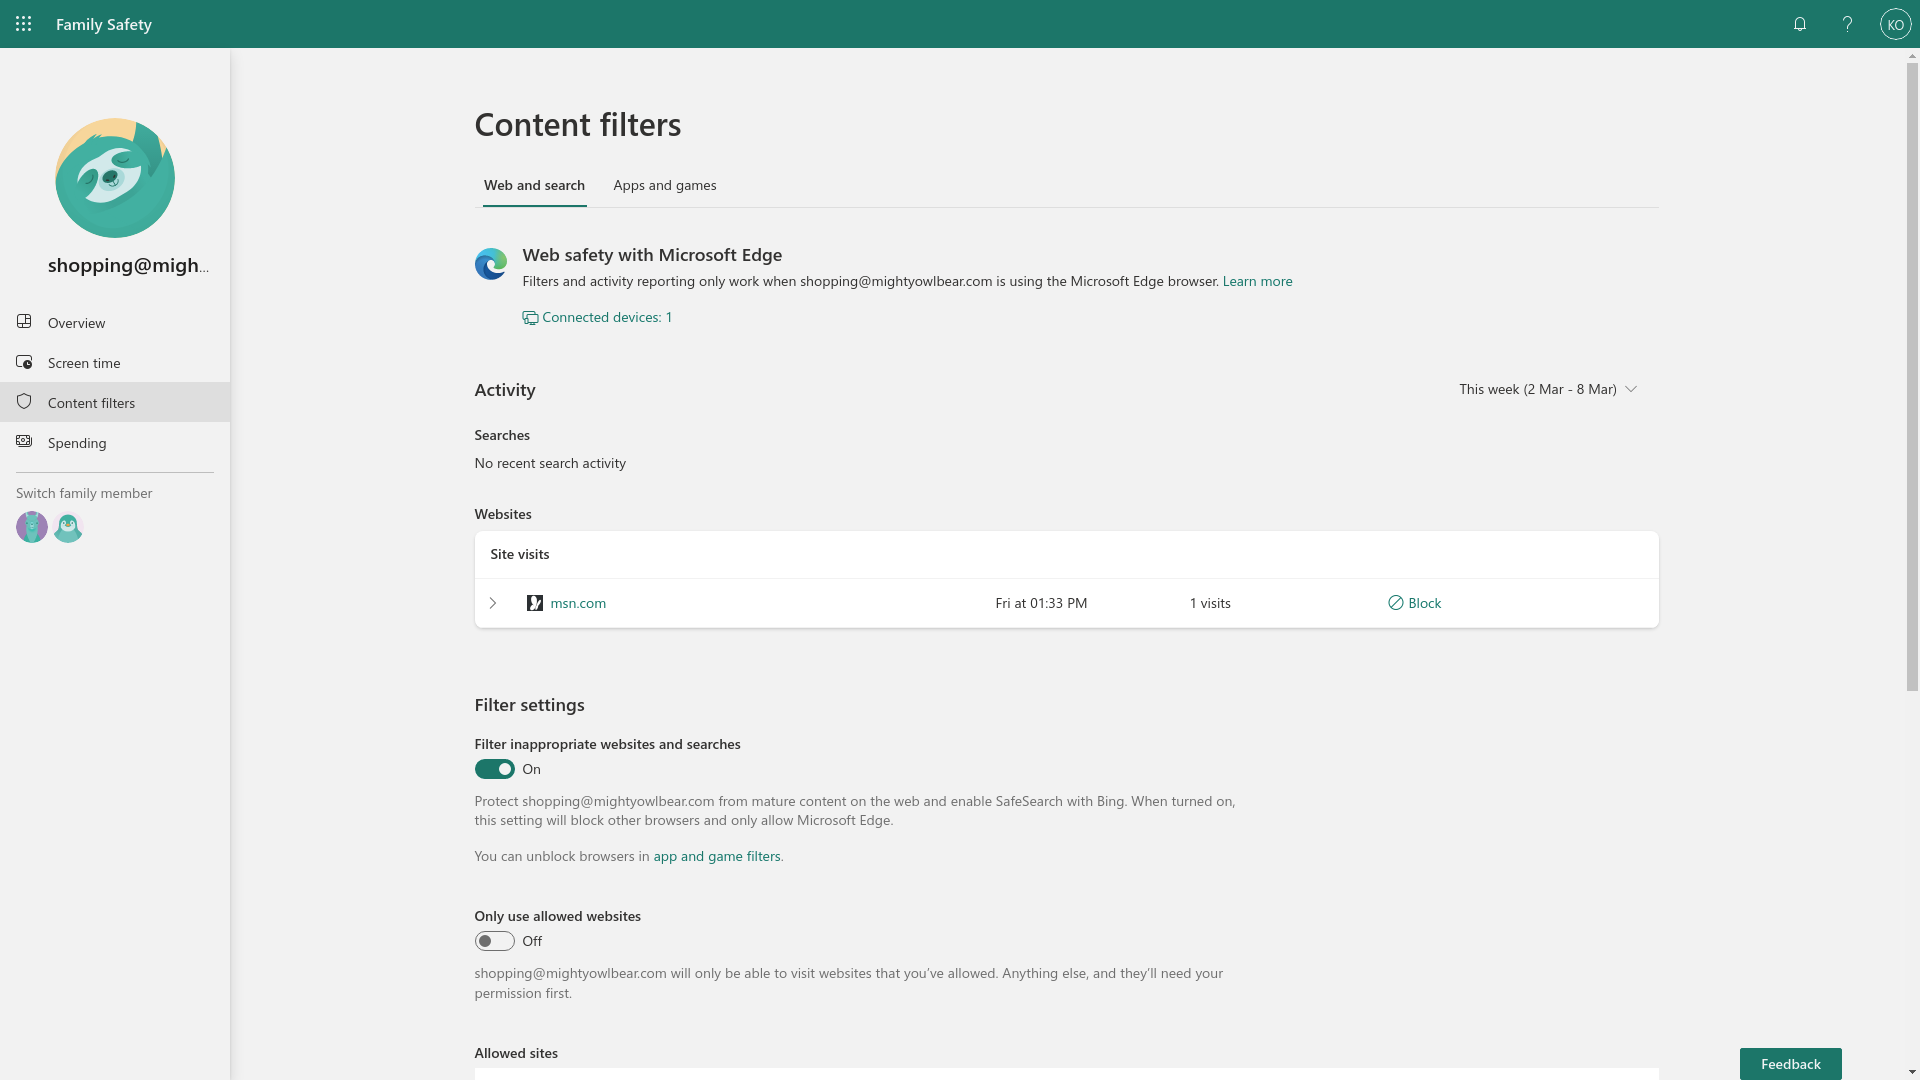 Content filters page